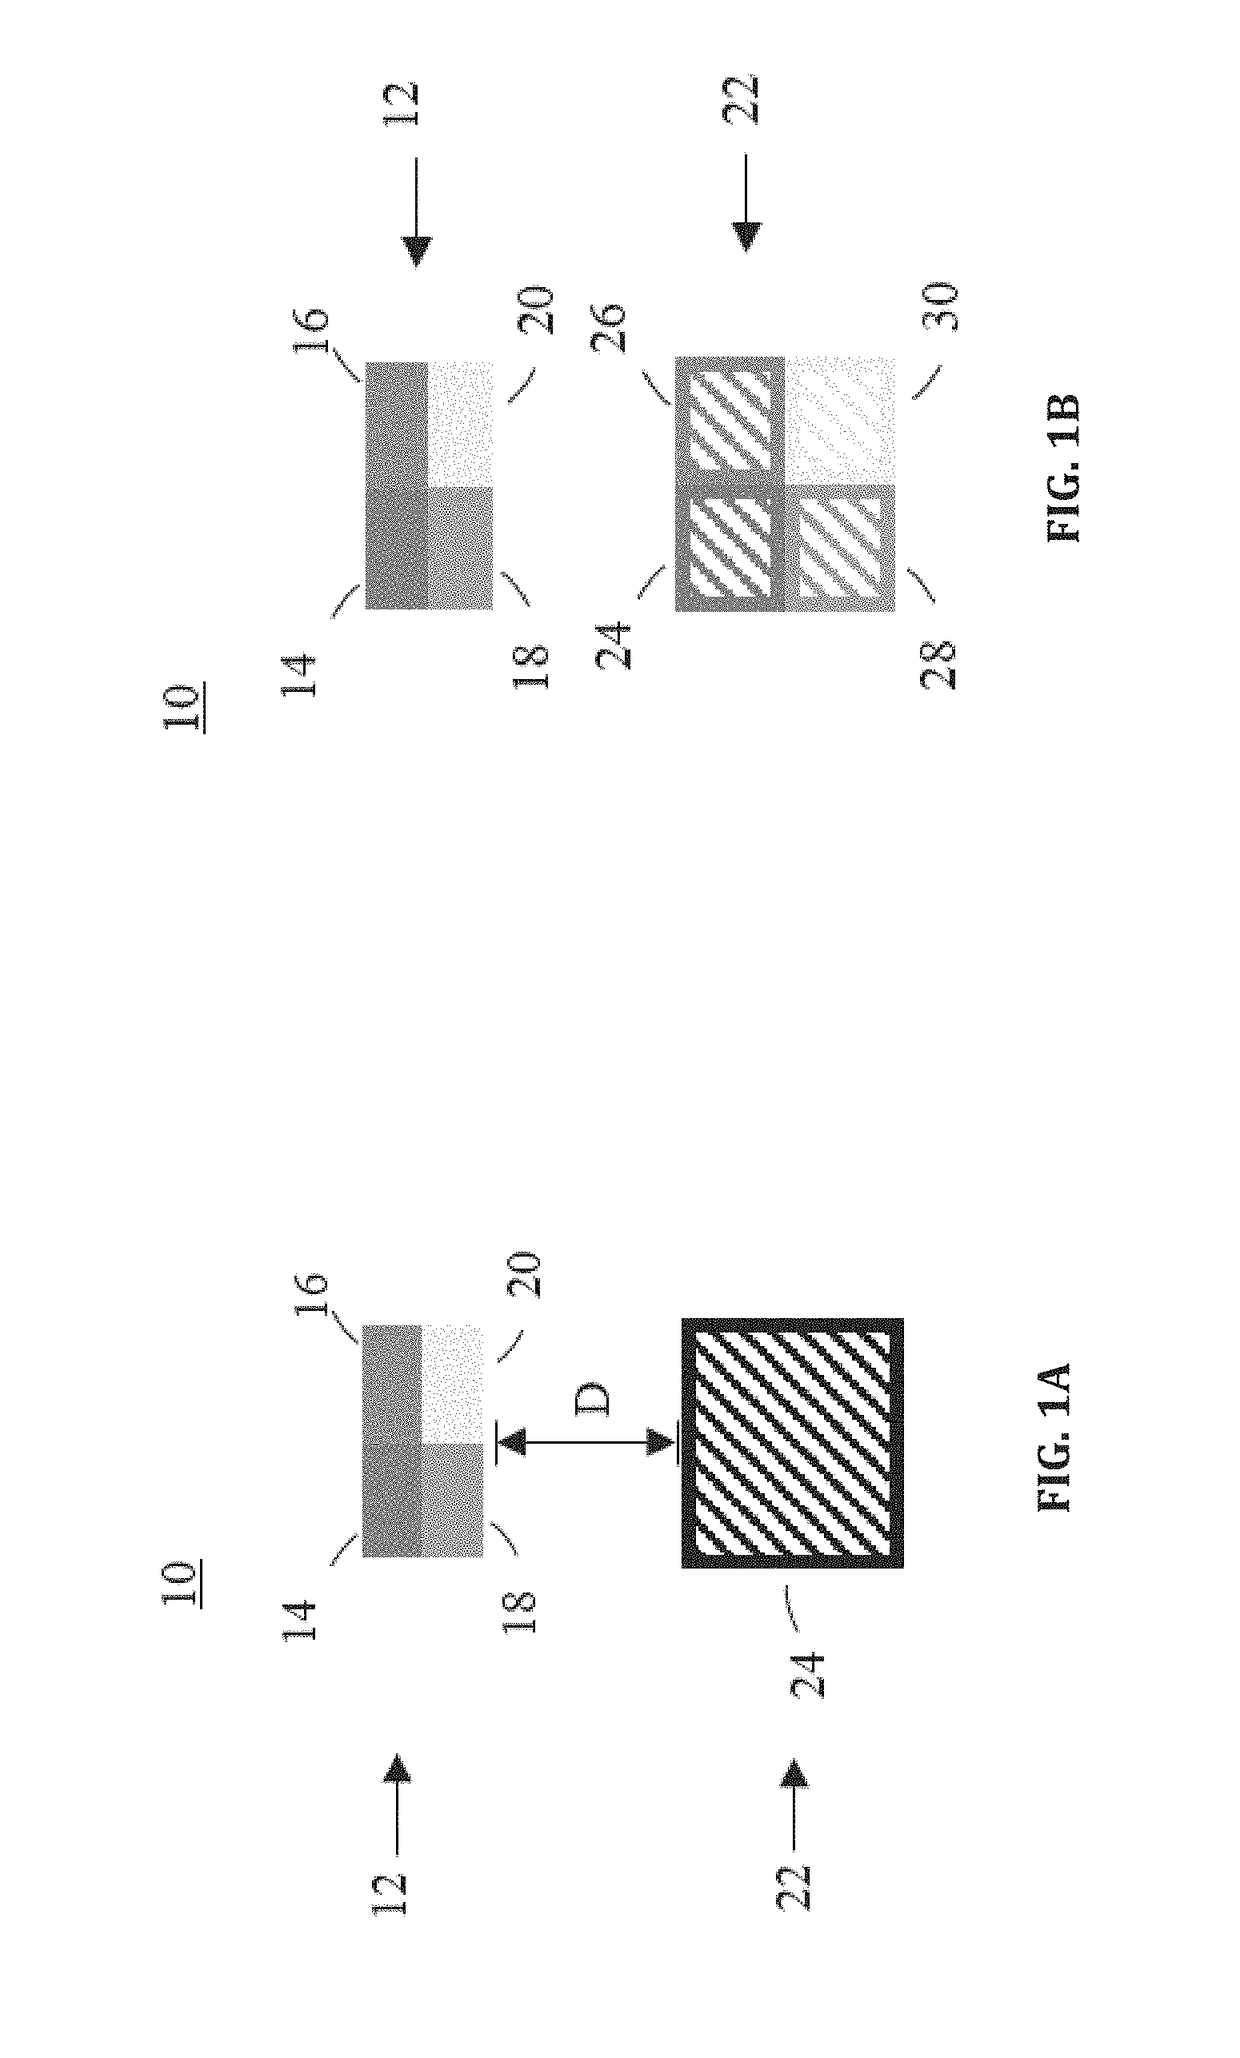 Method for Measuring Cardiovascular and Respiratory Parameters Based on Multi-Wavelength Photoplethysmography